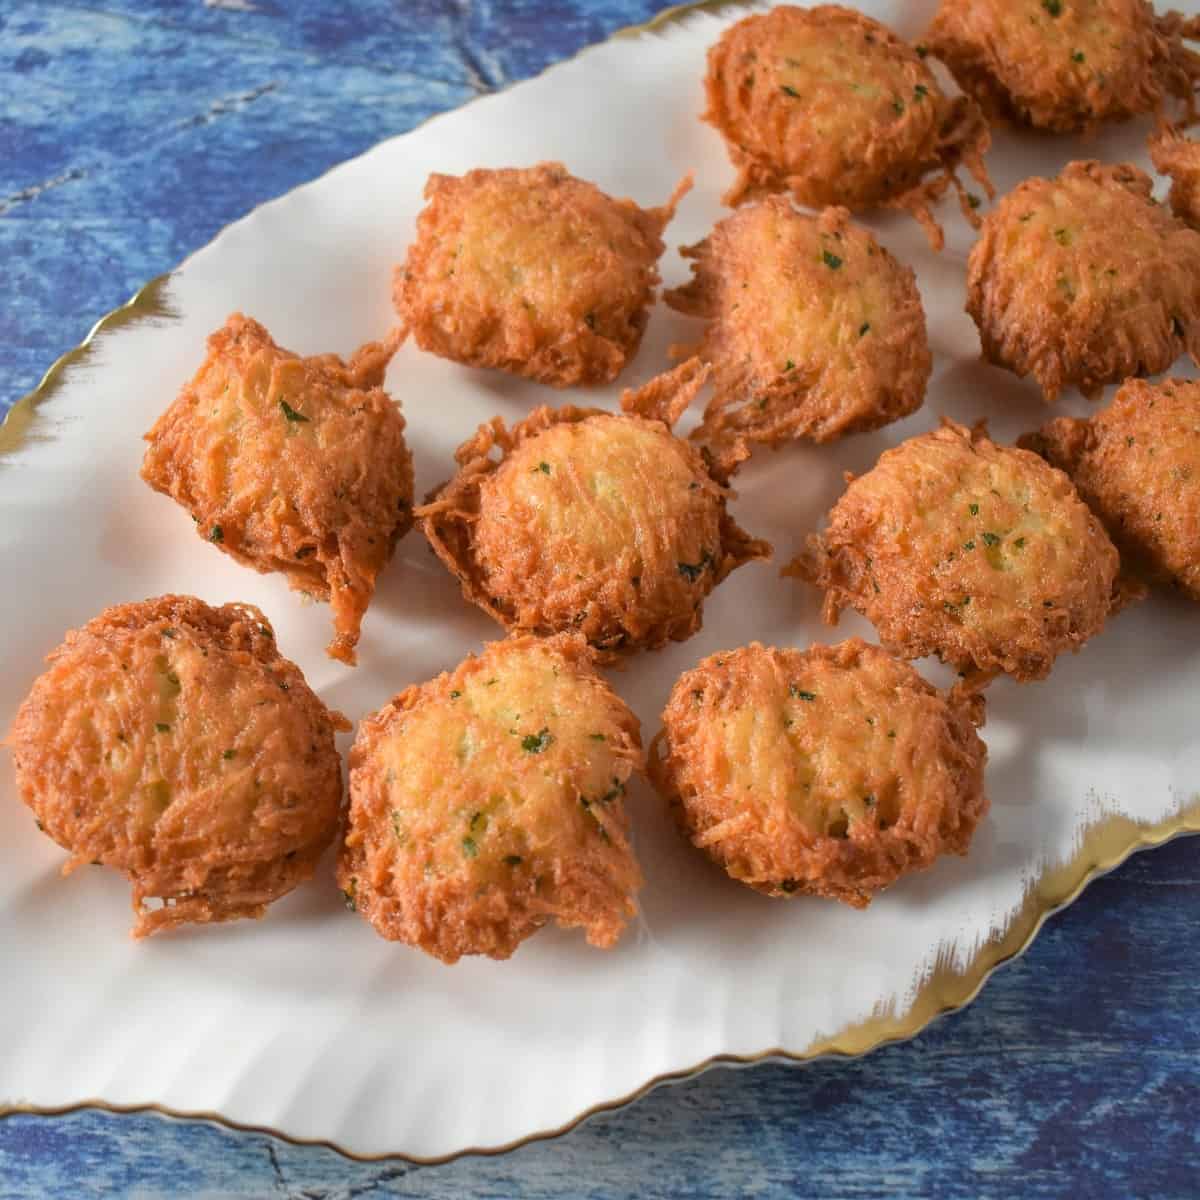 Malanga fritters arranged on a white platter set on a blue table.